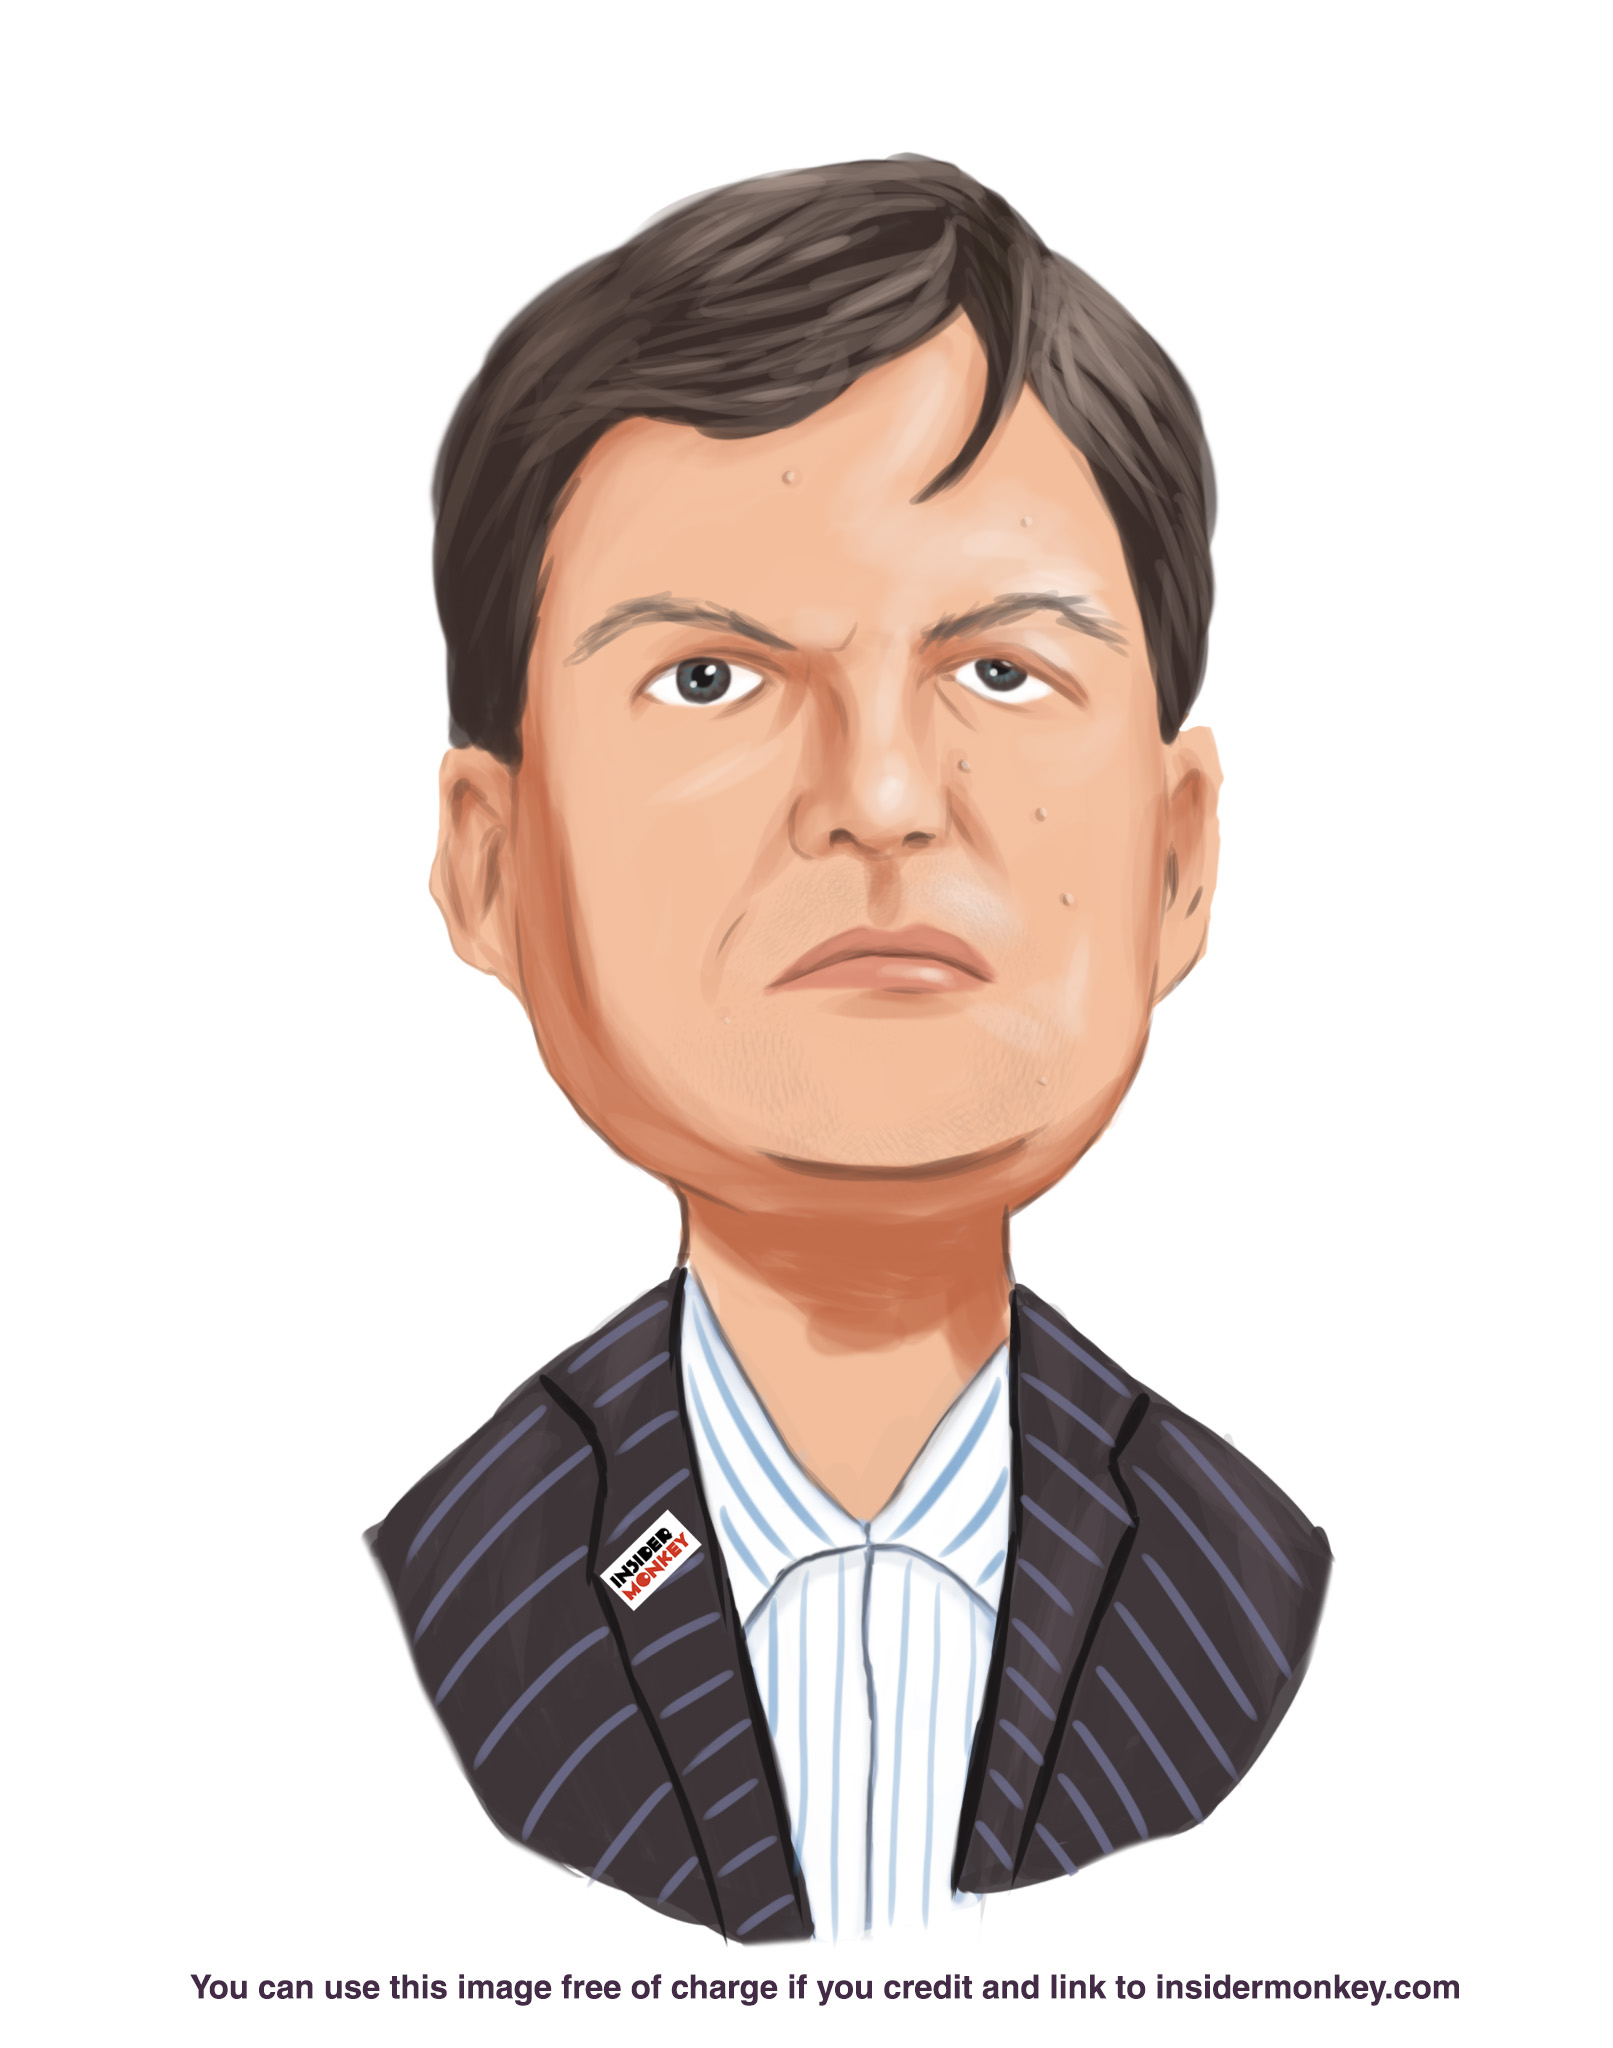 5 Stocks Dr Michael Burry Just Bought and Sold